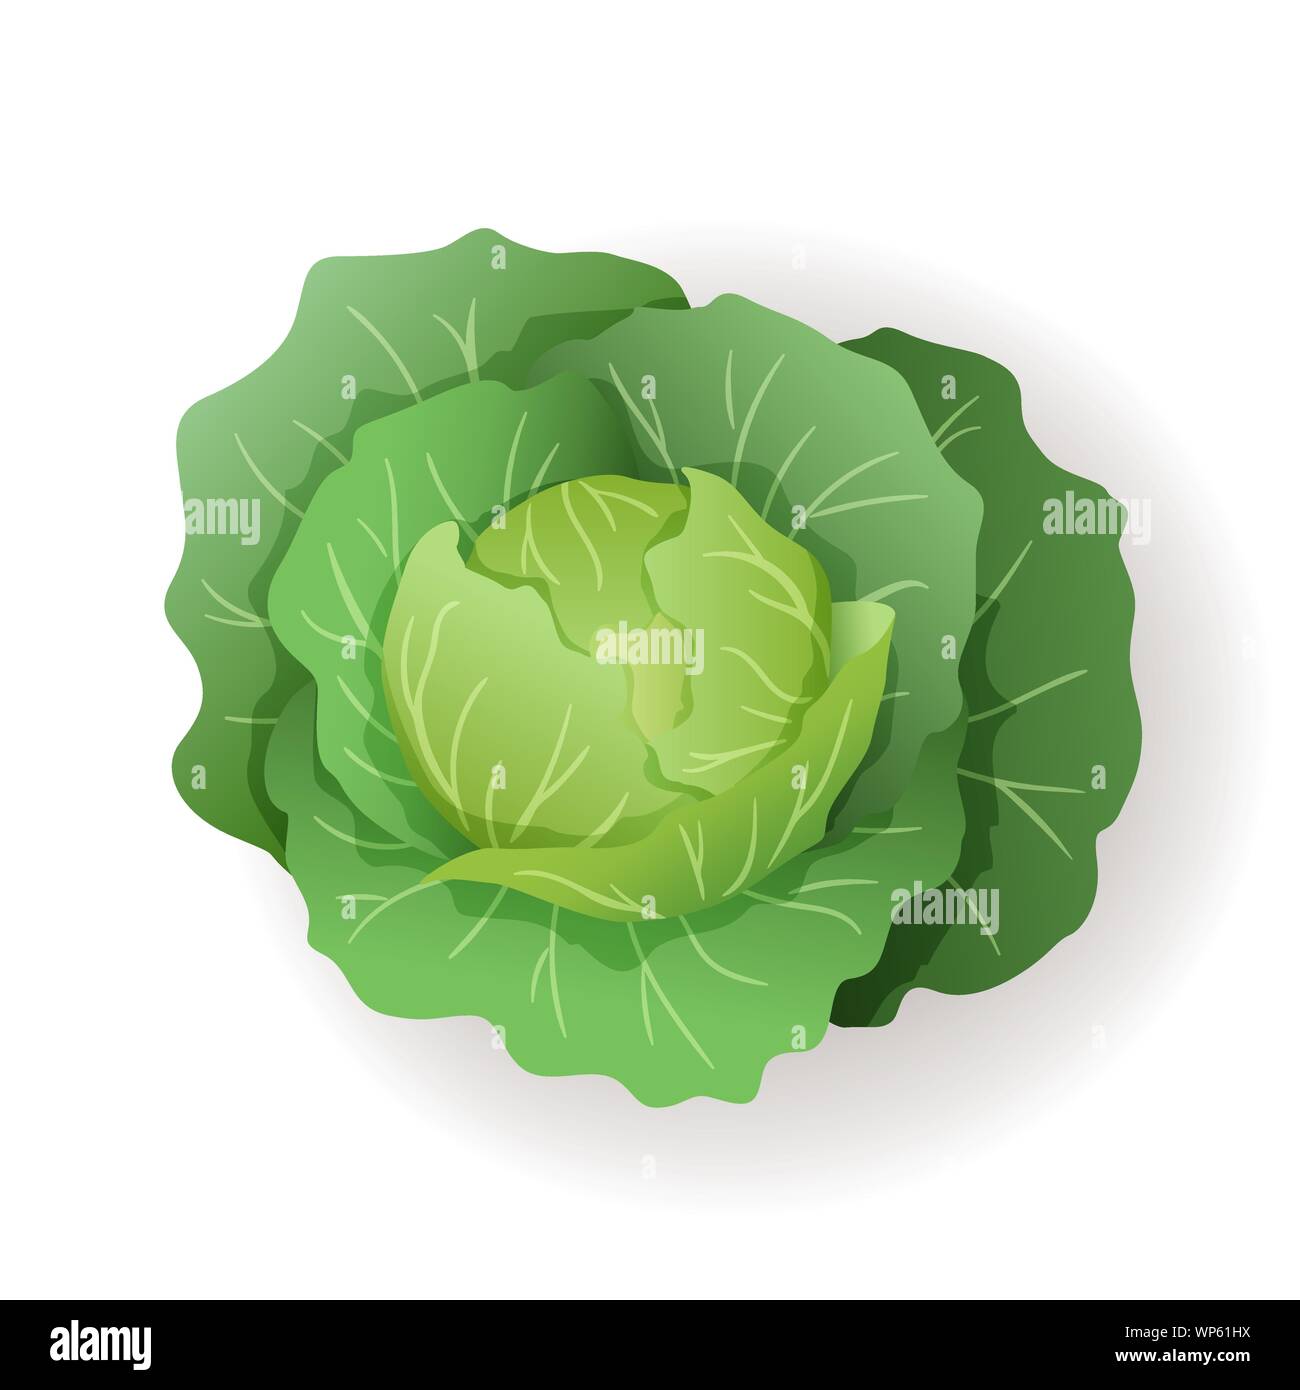 Green cabbage with big leaves icon isolated, fresh farm organic healthy food, vegetable, vector illustration. Stock Vector